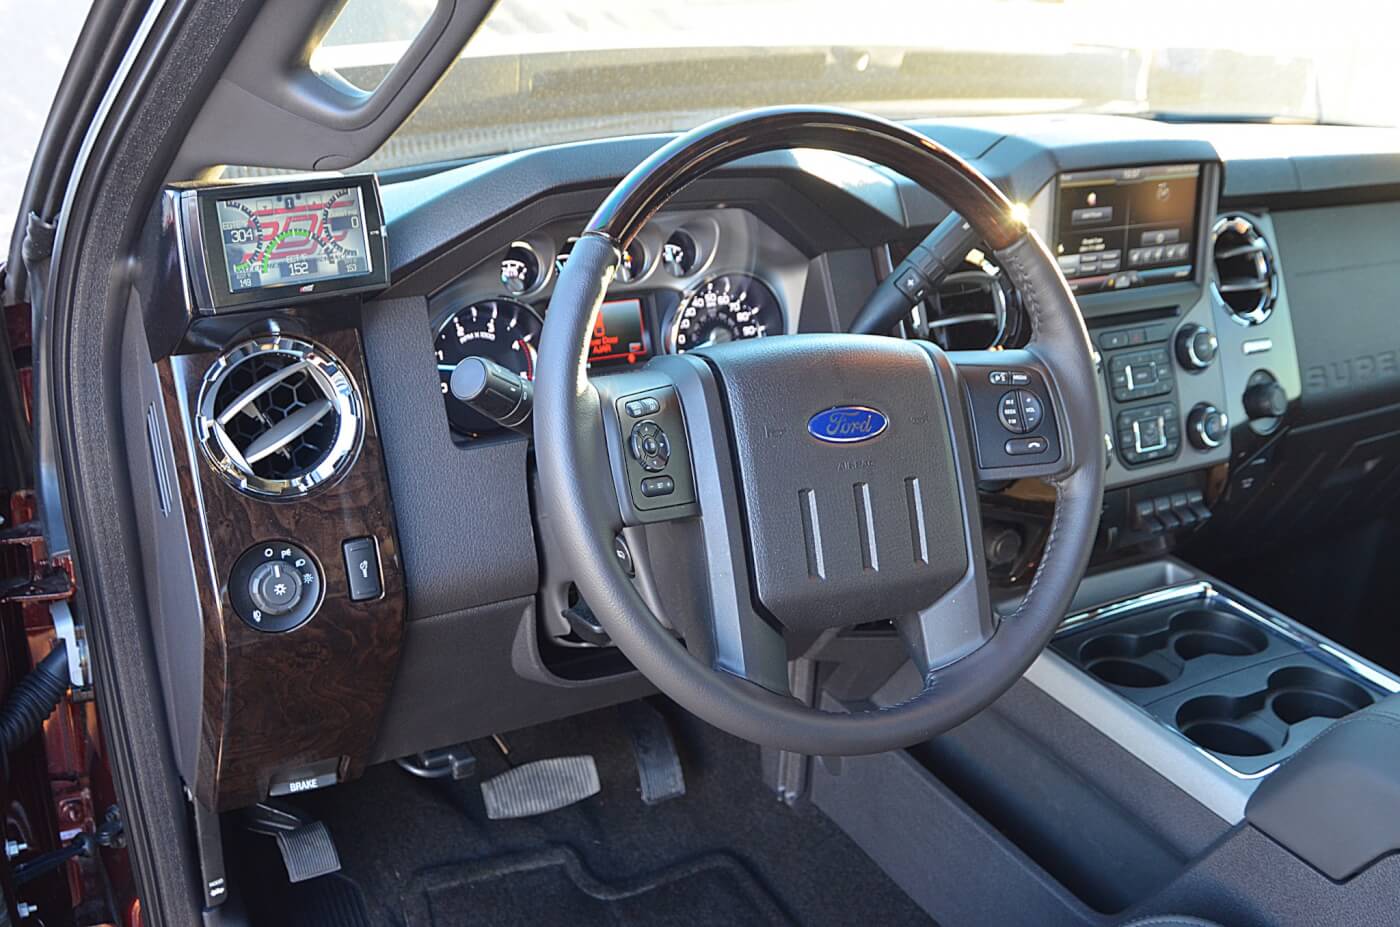 The interior is so clean on this new Ford F450 that Sean left it stock. Ford did a great job with the layout, he left it as is.